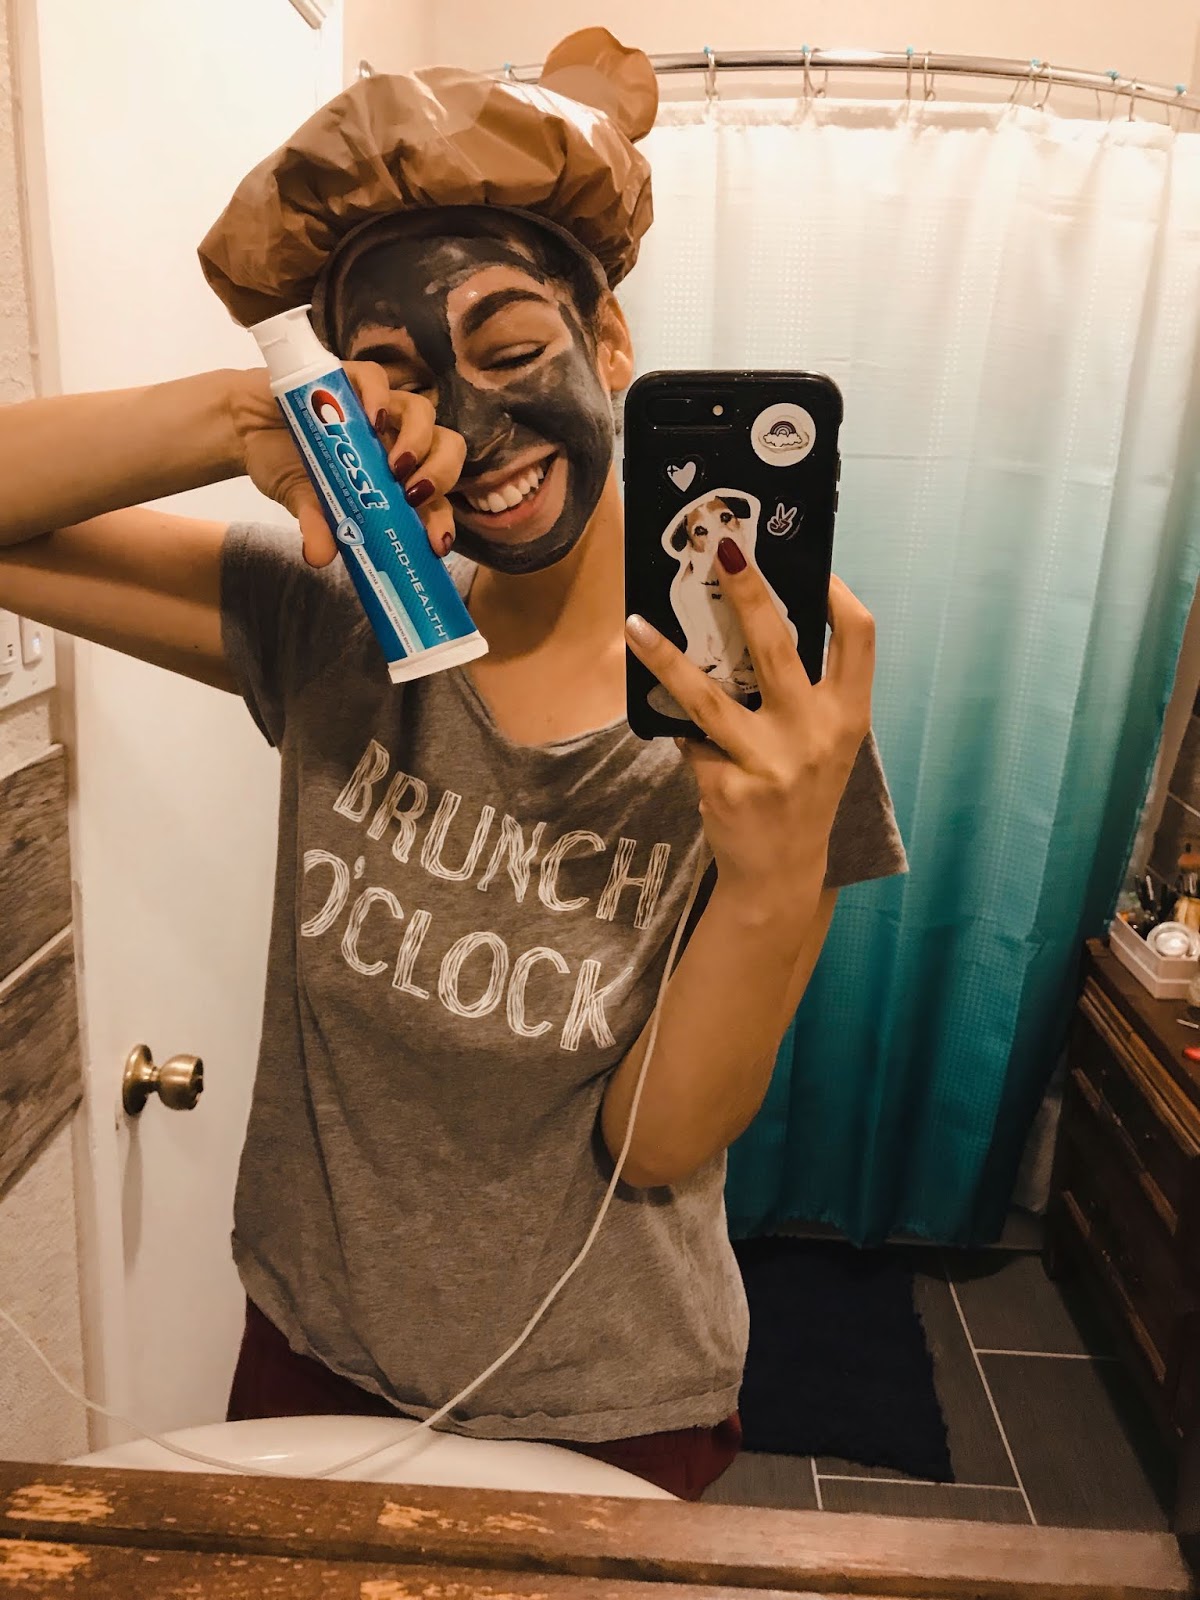 Amber "aMused Blog" taking mirror selfie. Wearing a grey clay mask, and holding crest toothpaste